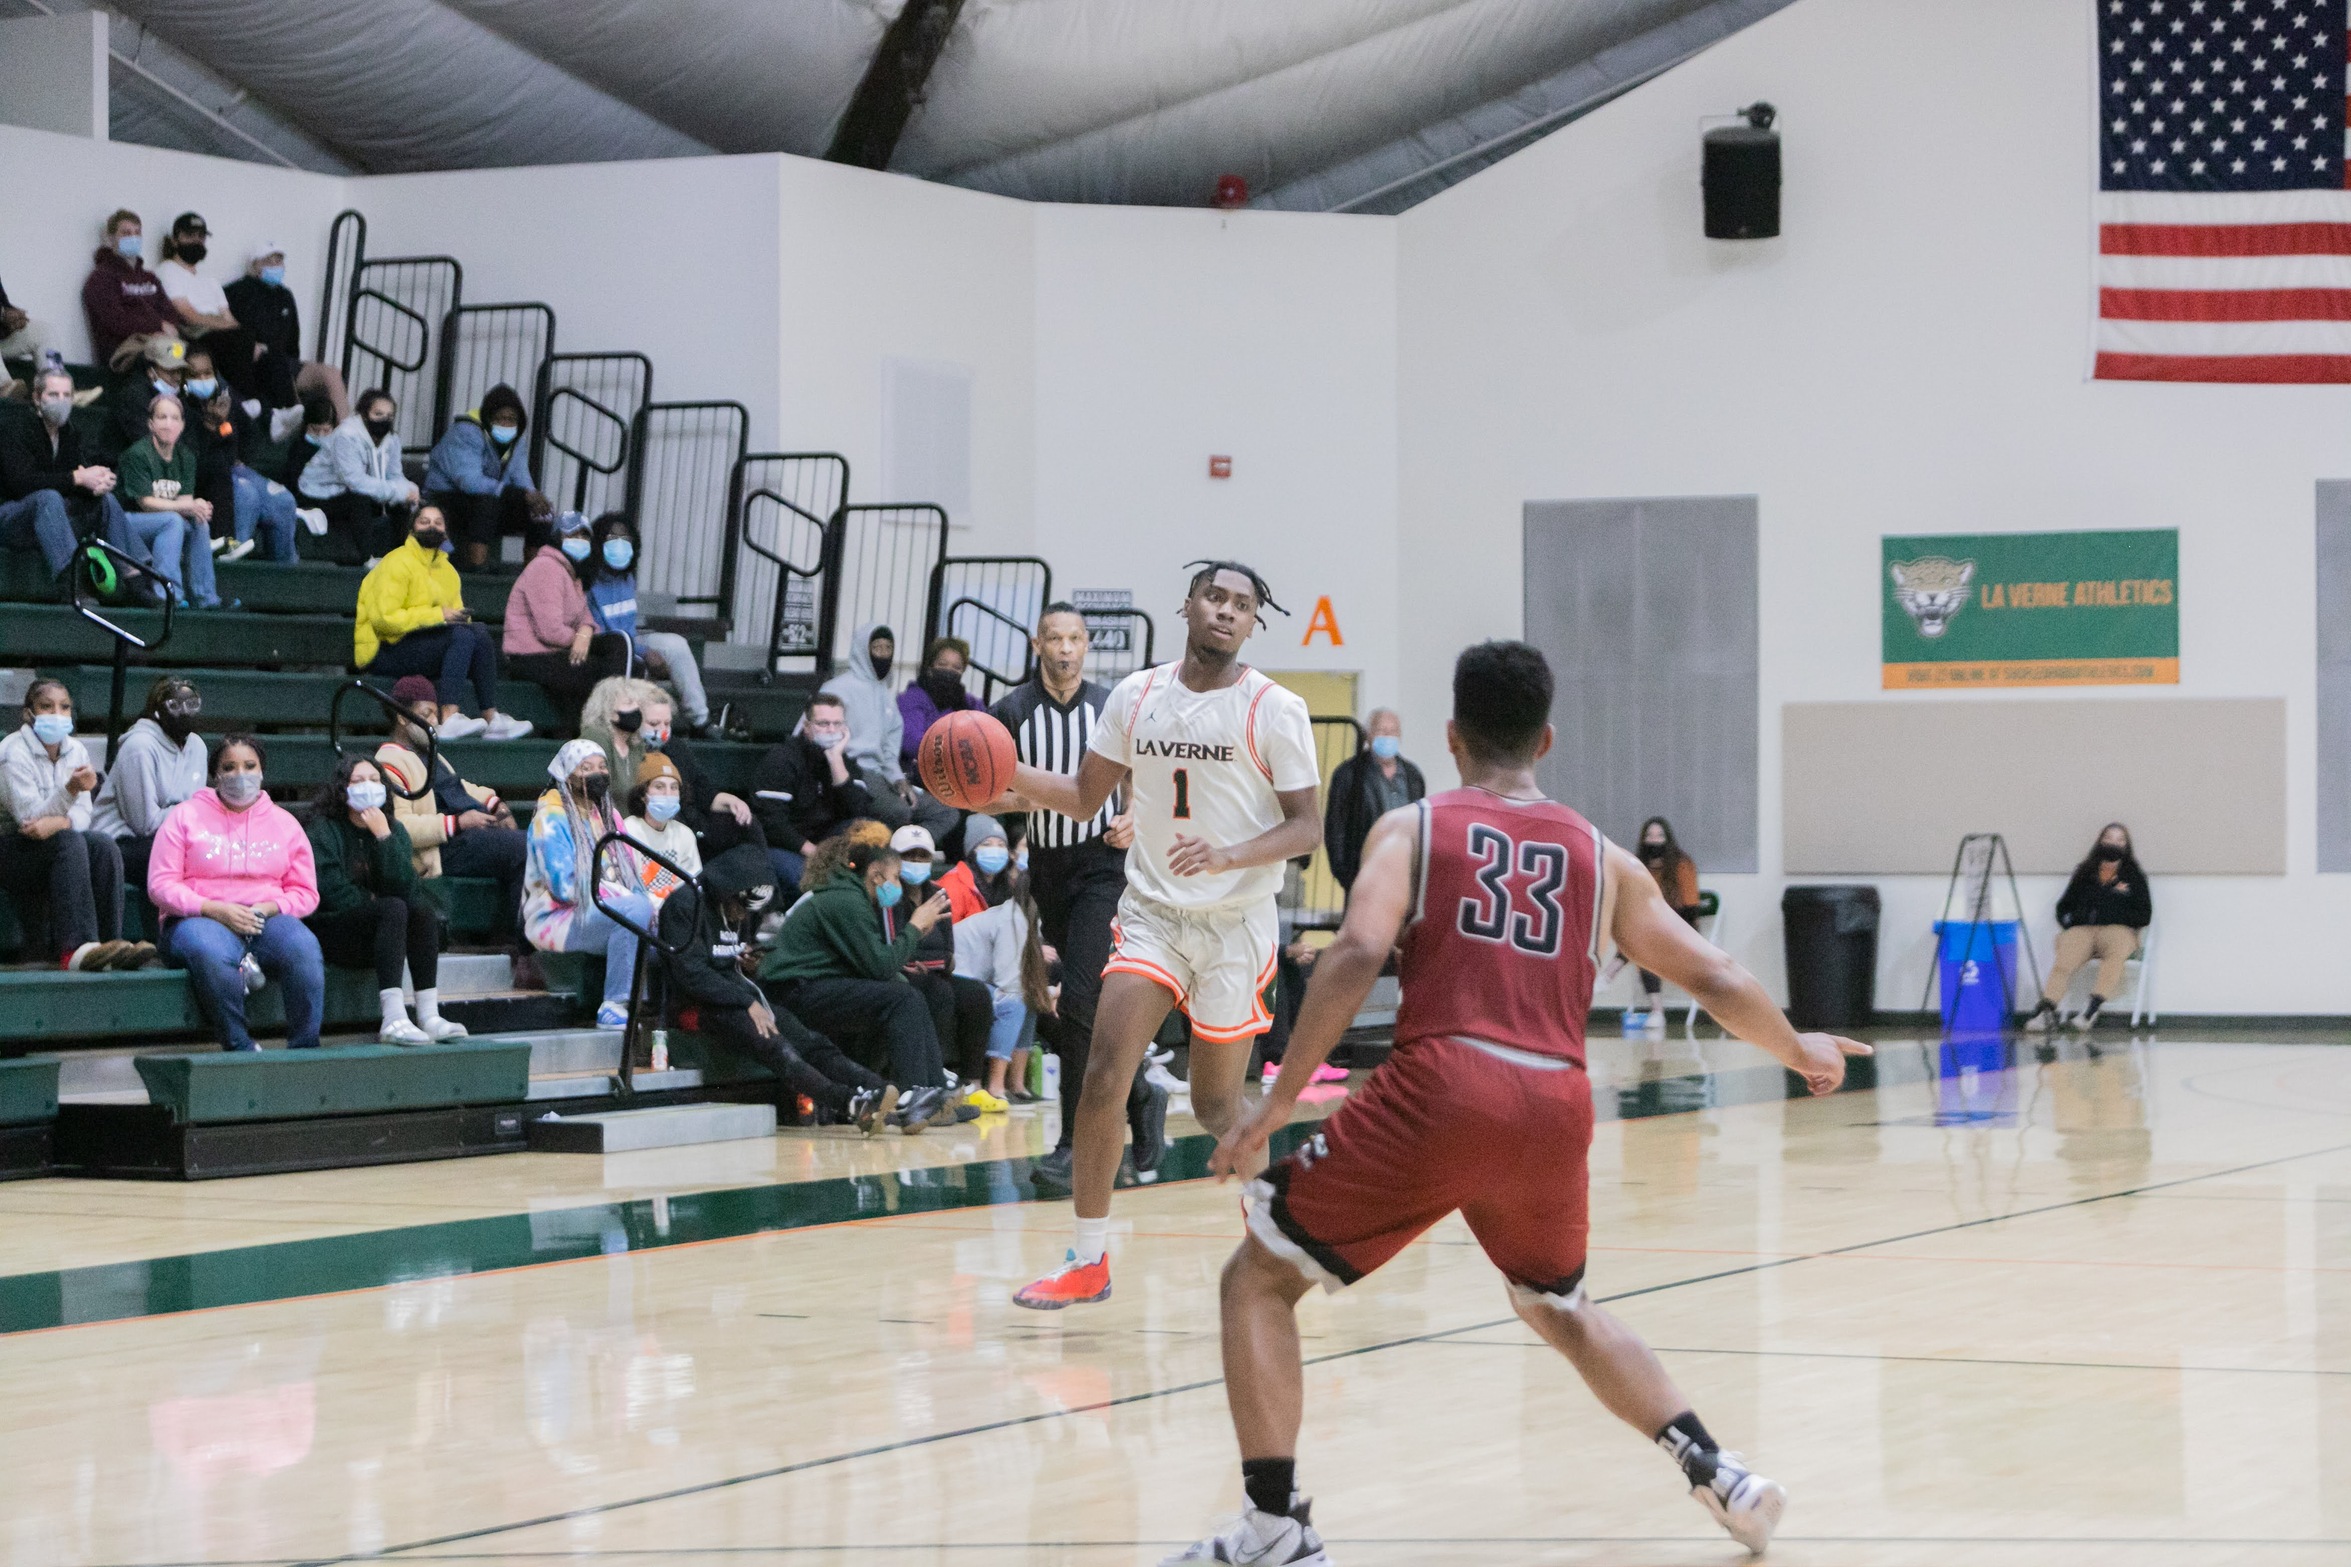 Leopards Take Second Half, Drop Contest to Caltech